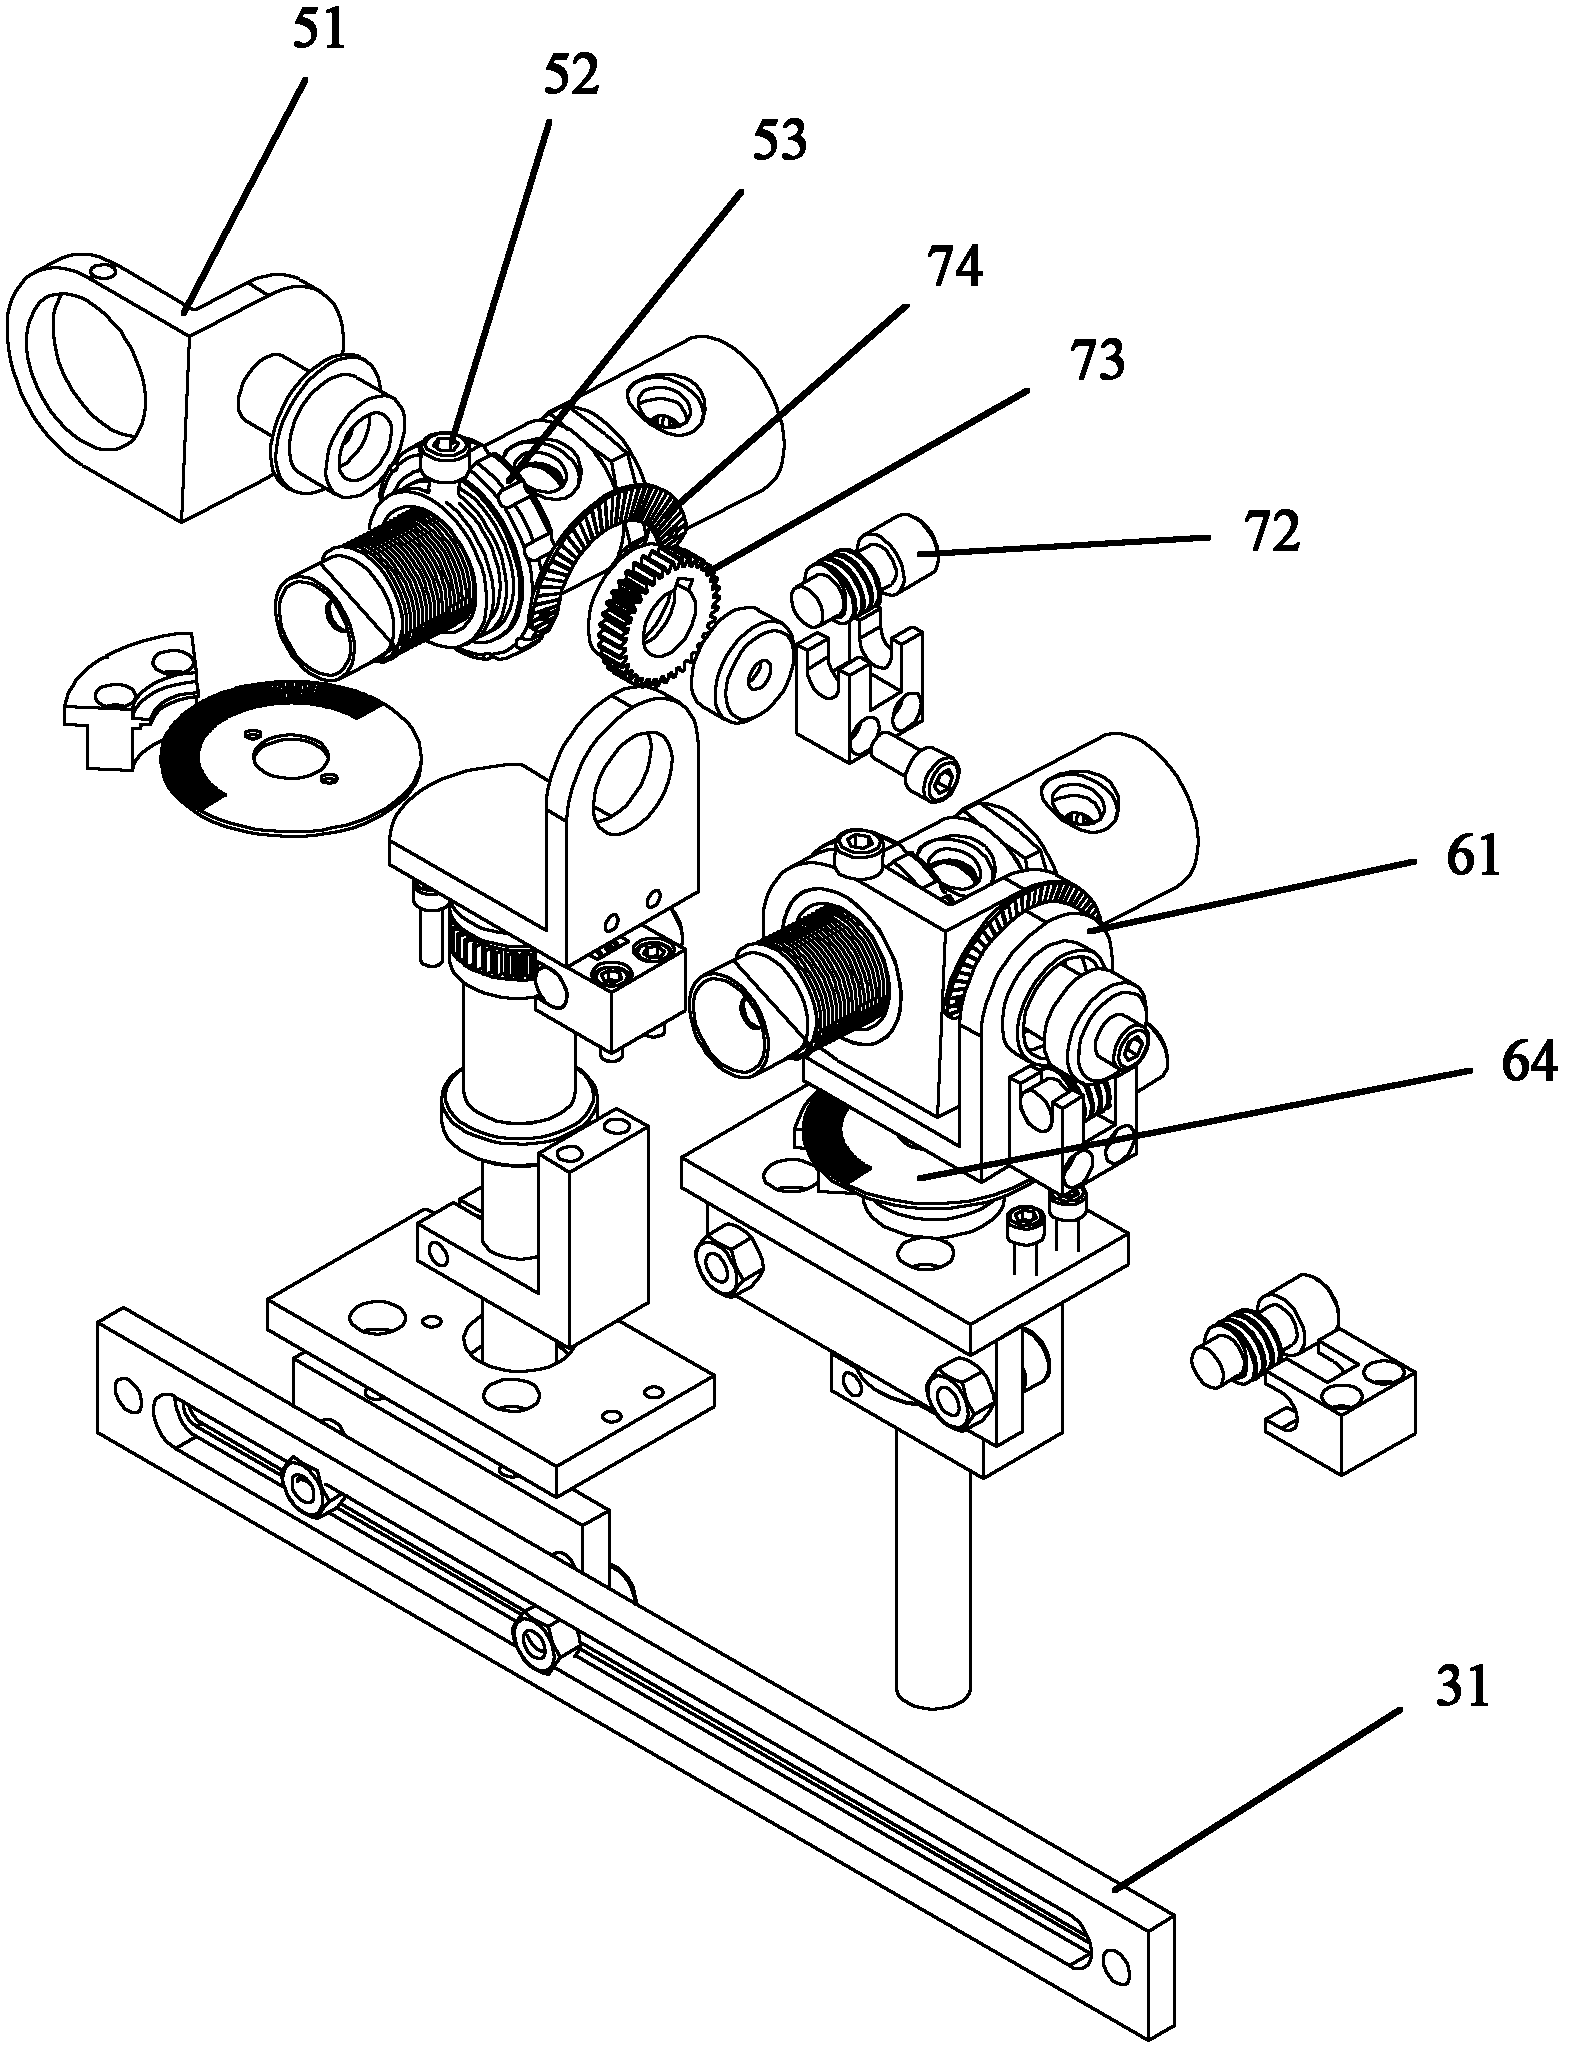 Nozzle three-dimensional positioning and angle adjusting device